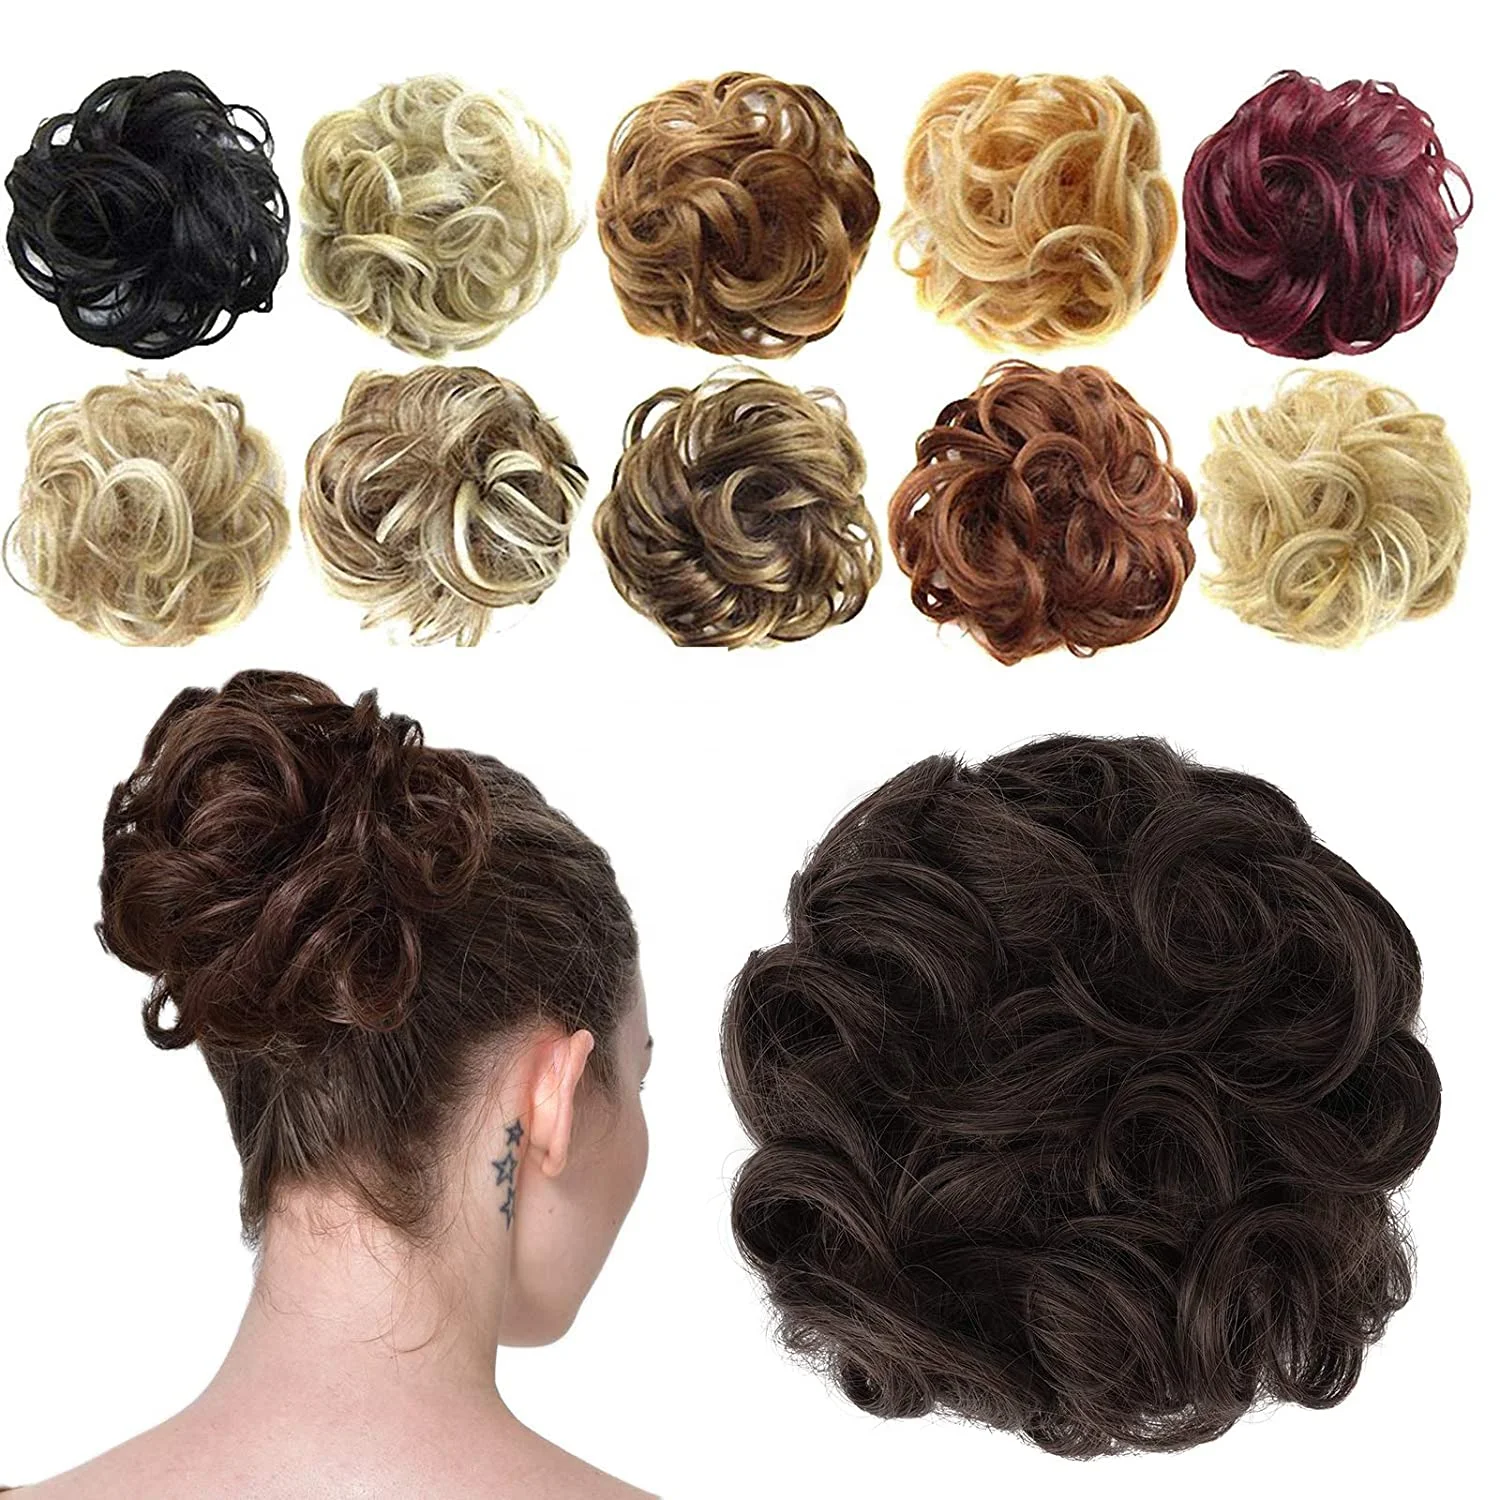 

TP Curly Scrunchie Chignon Hair Bun With Rubber Band Hair Ring Wrap On Messy Hair Bun Ponytails